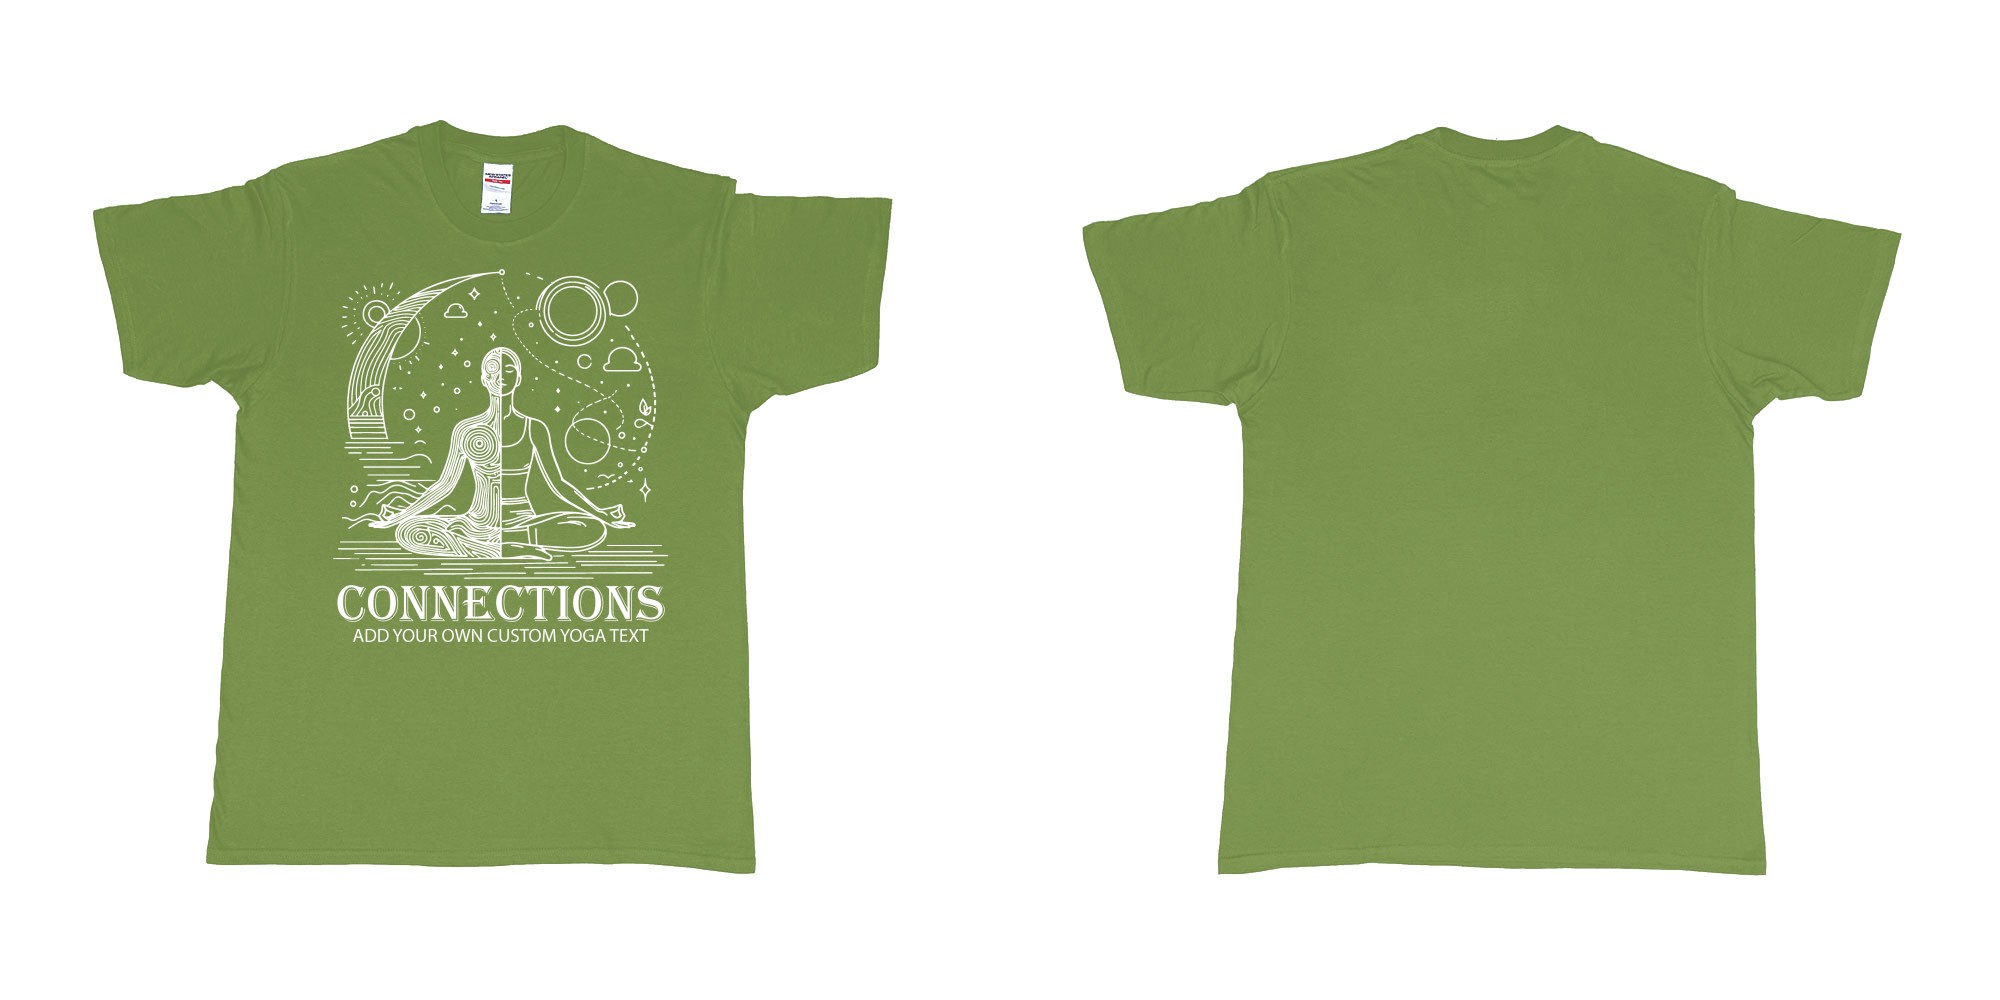 Custom tshirt design yogo connections human moon stars custom bali tshirt printing in fabric color military-green choice your own text made in Bali by The Pirate Way